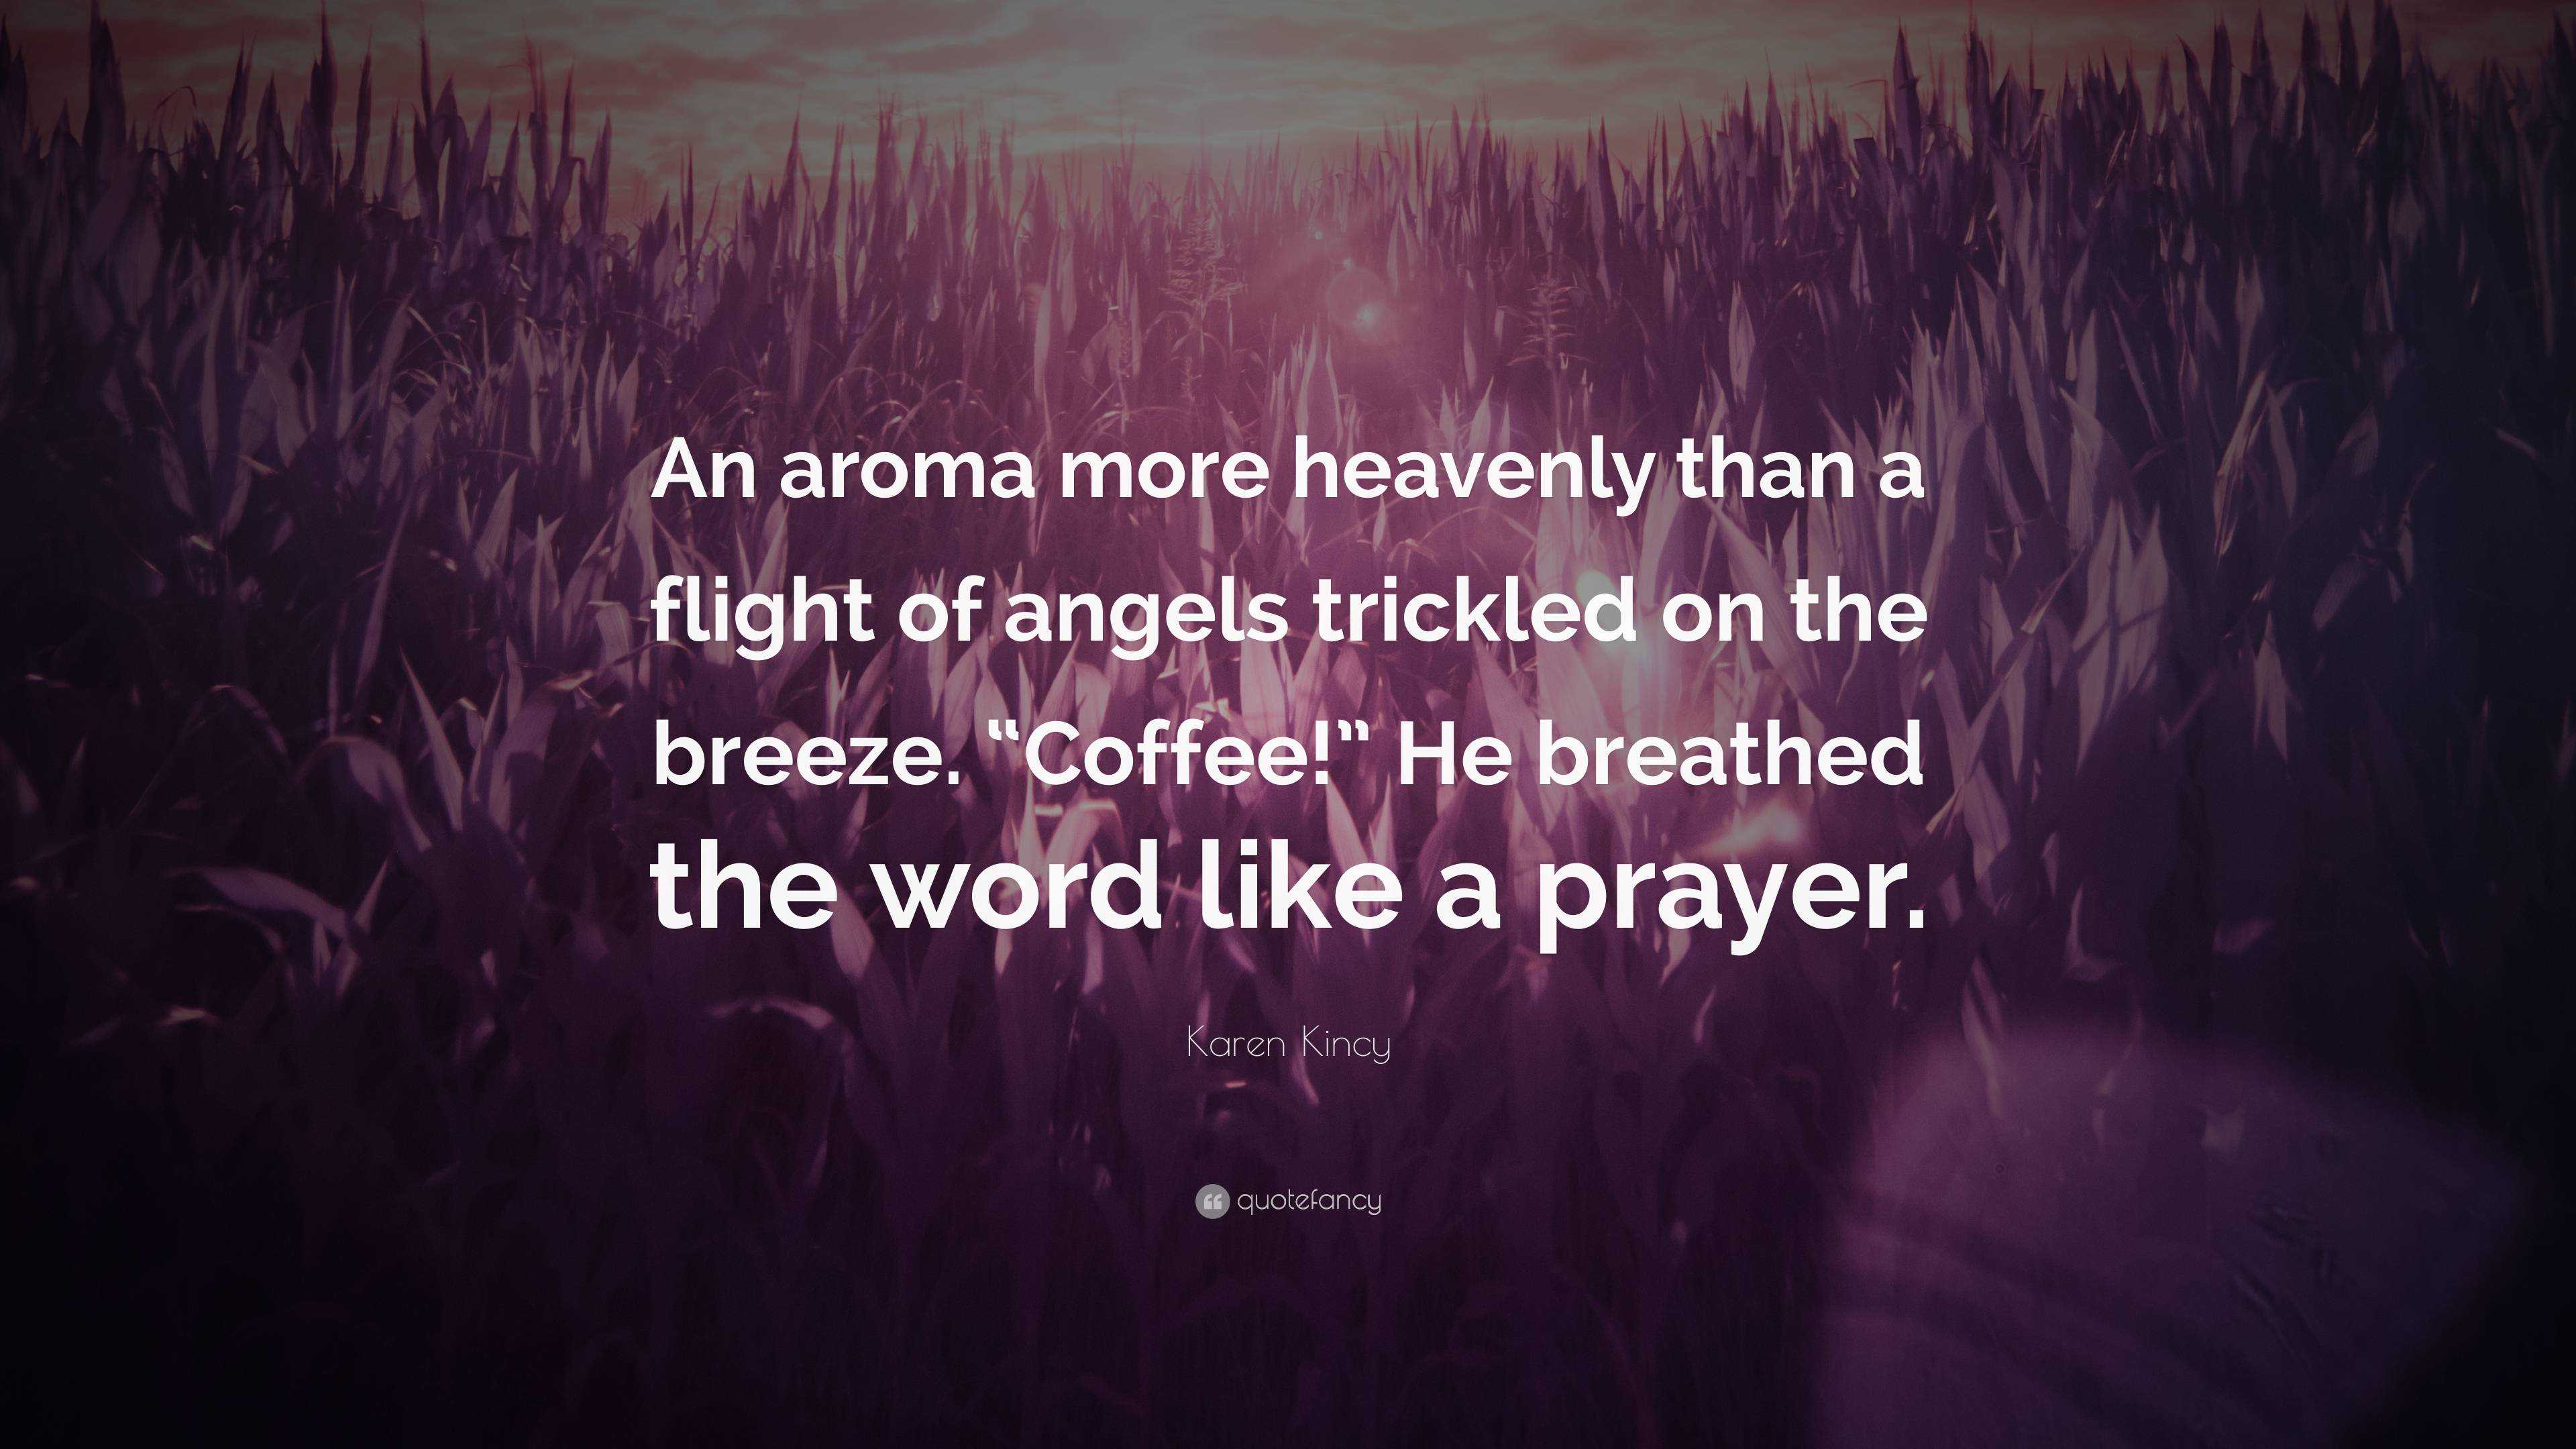 Karen Kincy Quote: “An aroma more heavenly than a flight of angels